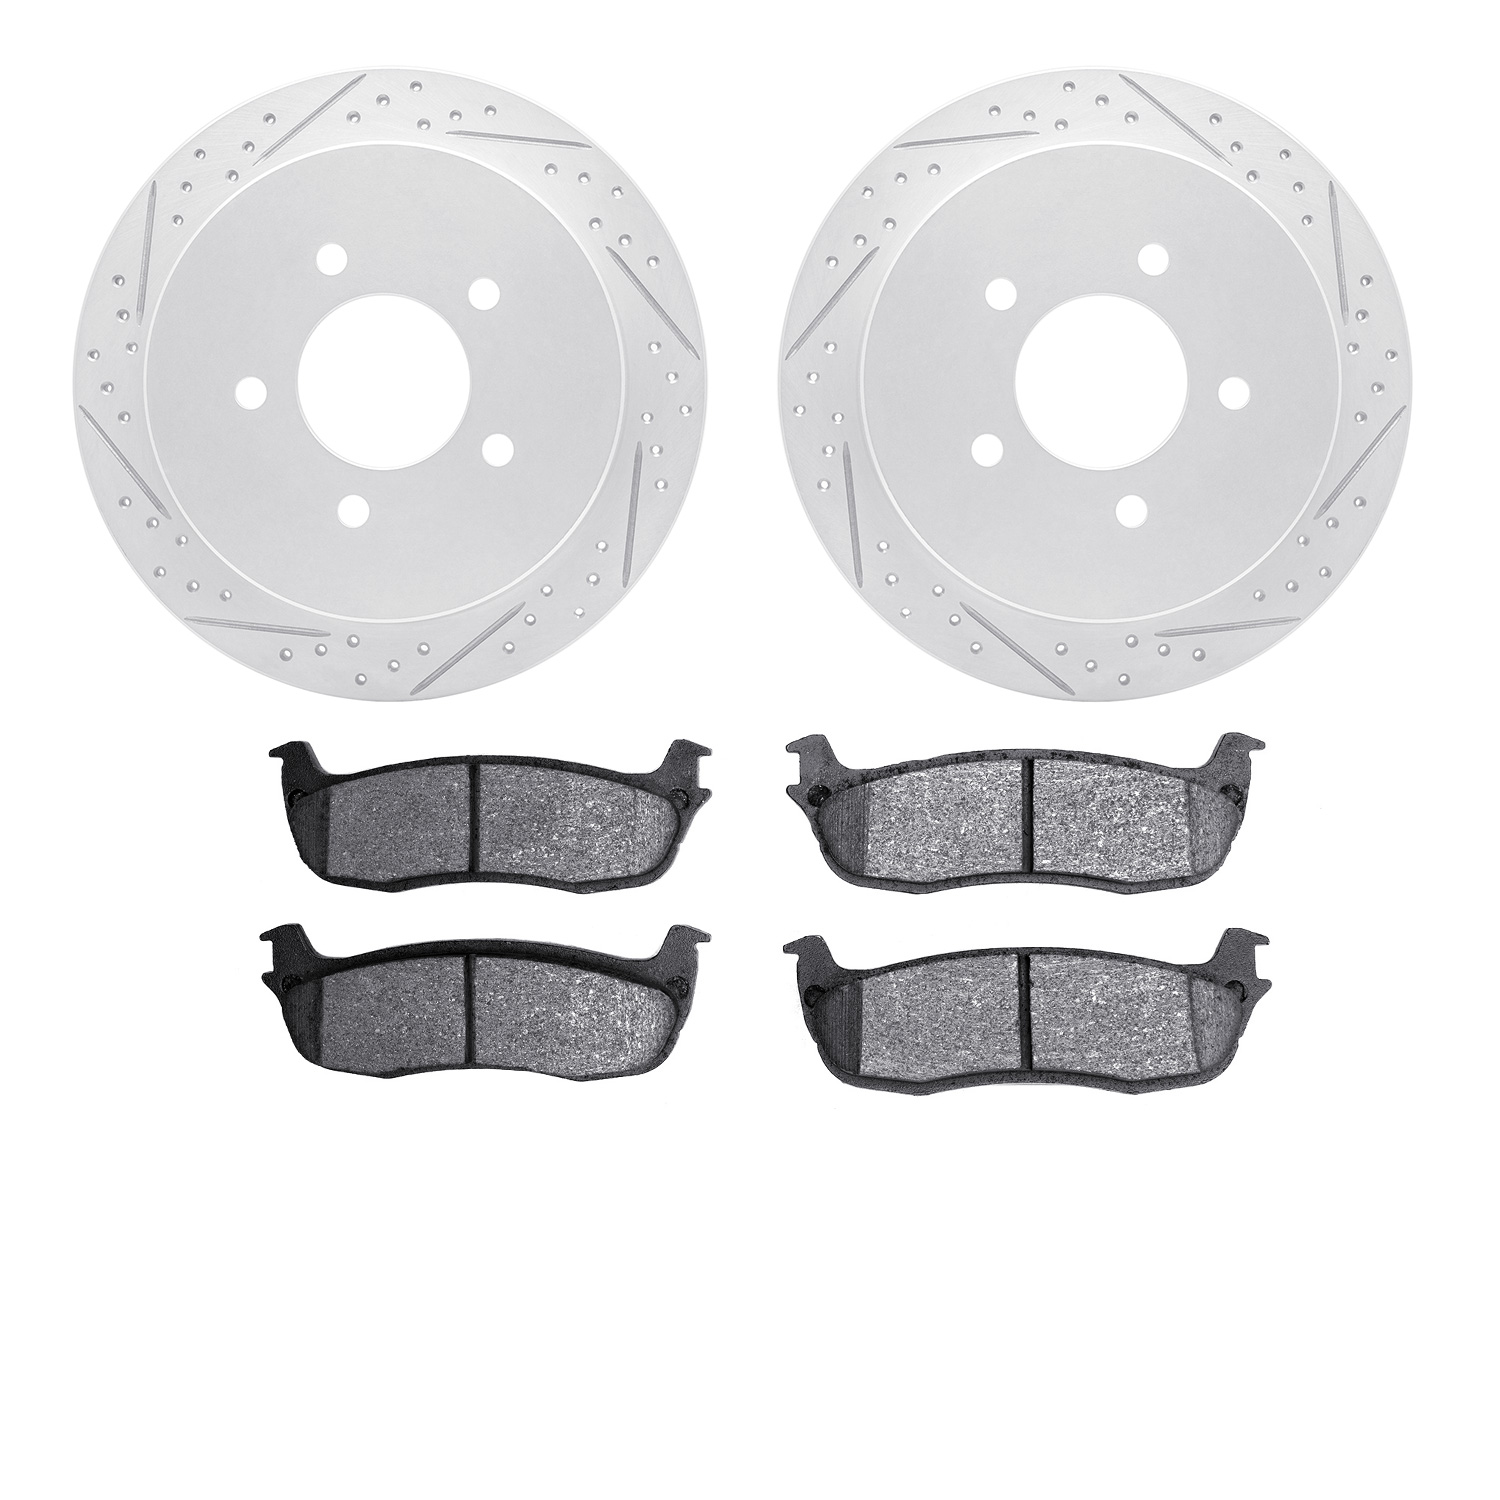 2402-54035 Geoperformance Drilled/Slotted Brake Rotors with Ultimate-Duty Brake Pads Kit, 1997-2004 Ford/Lincoln/Mercury/Mazda,